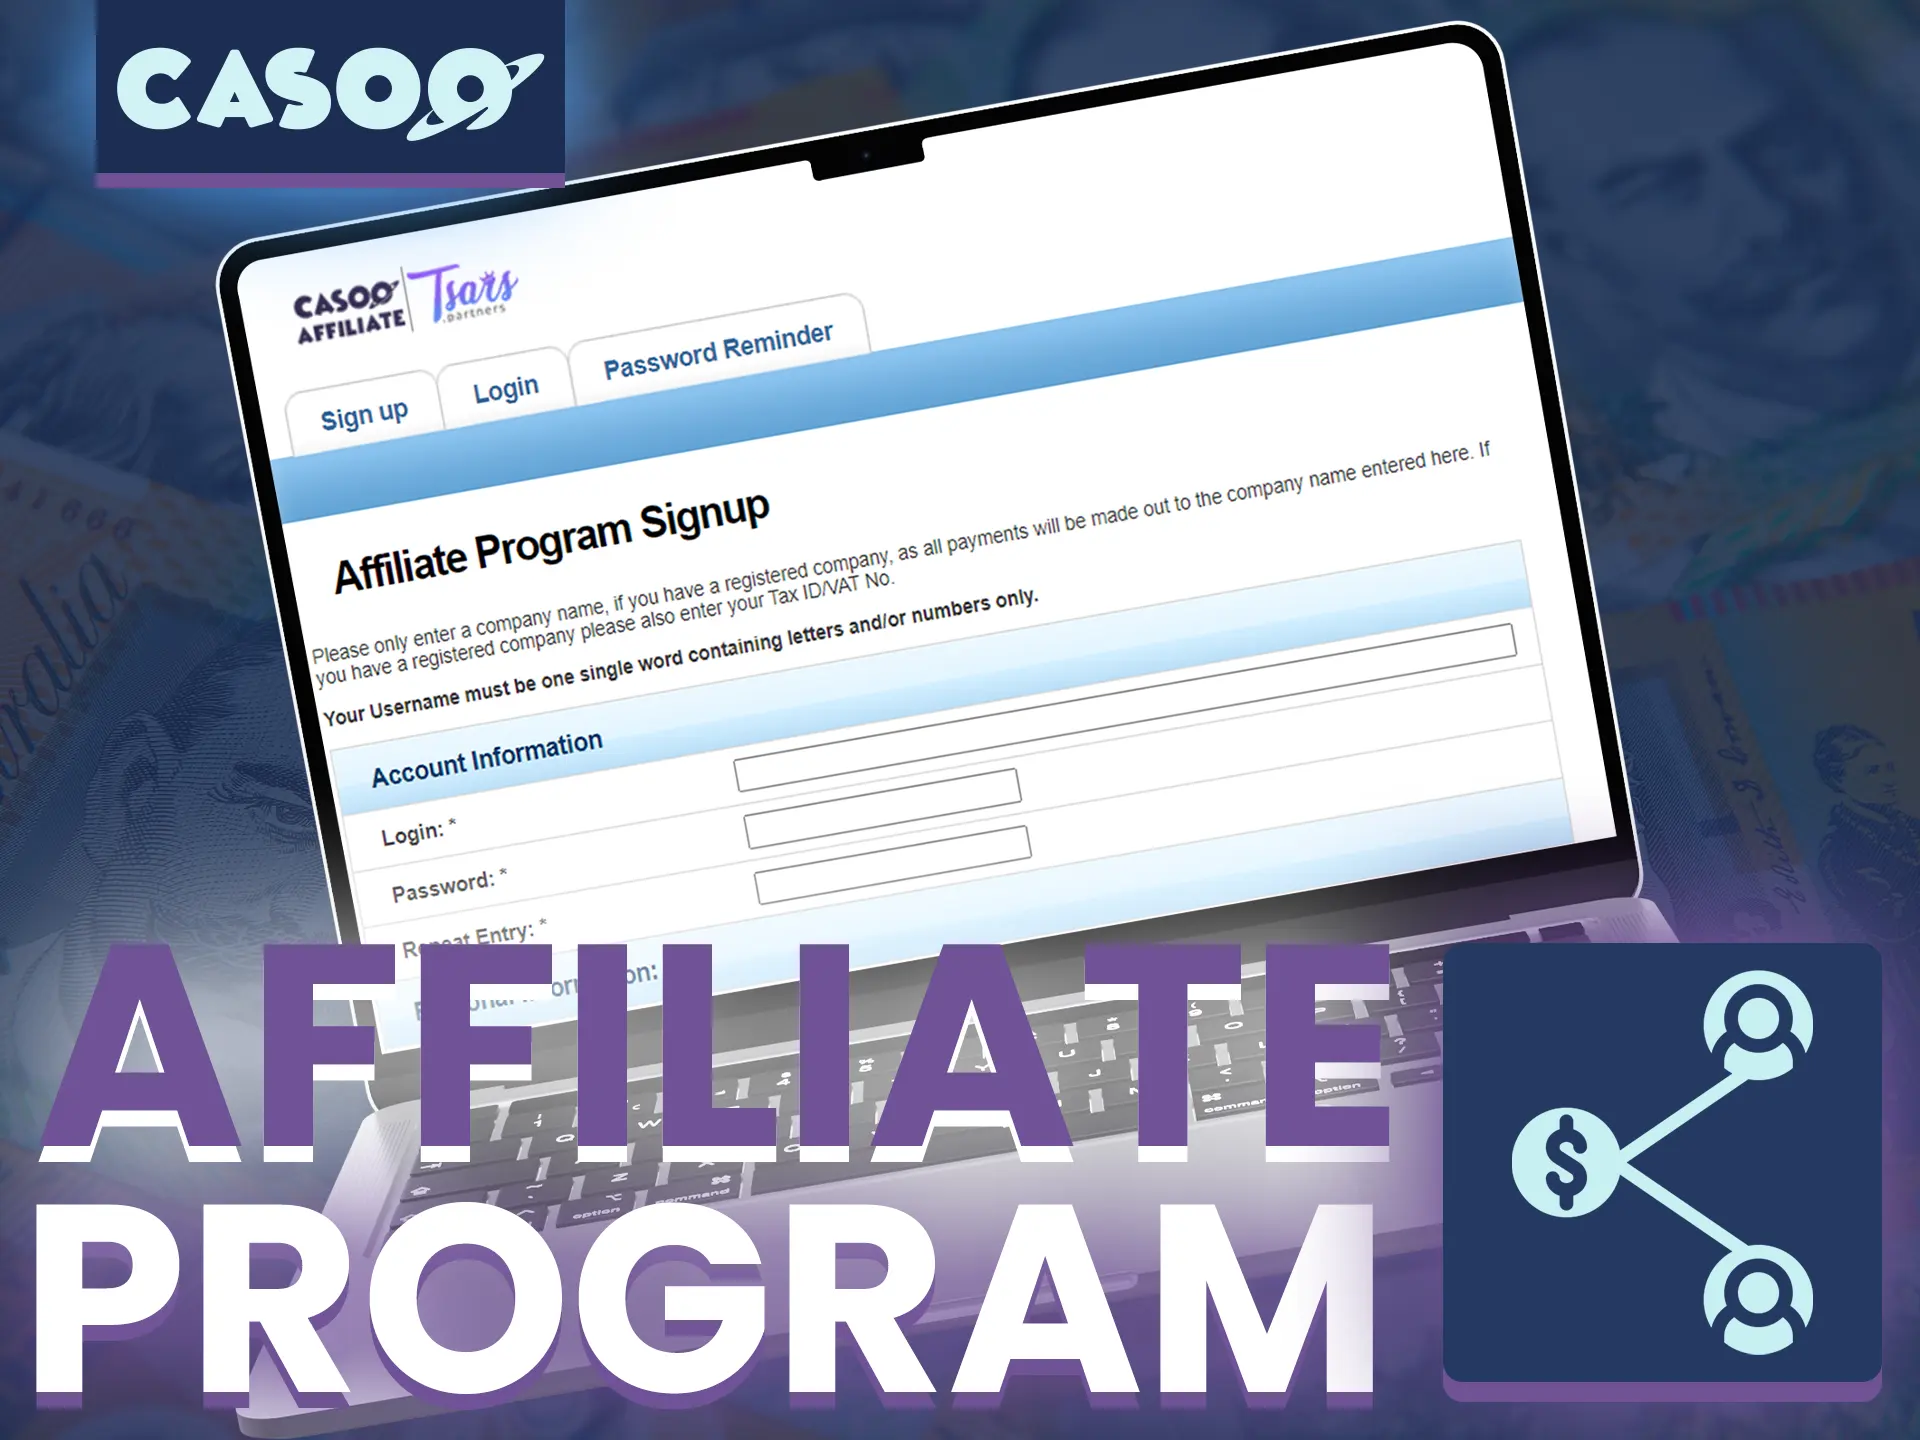 Casoo's affiliate program allows you to start earning by attracting new users.